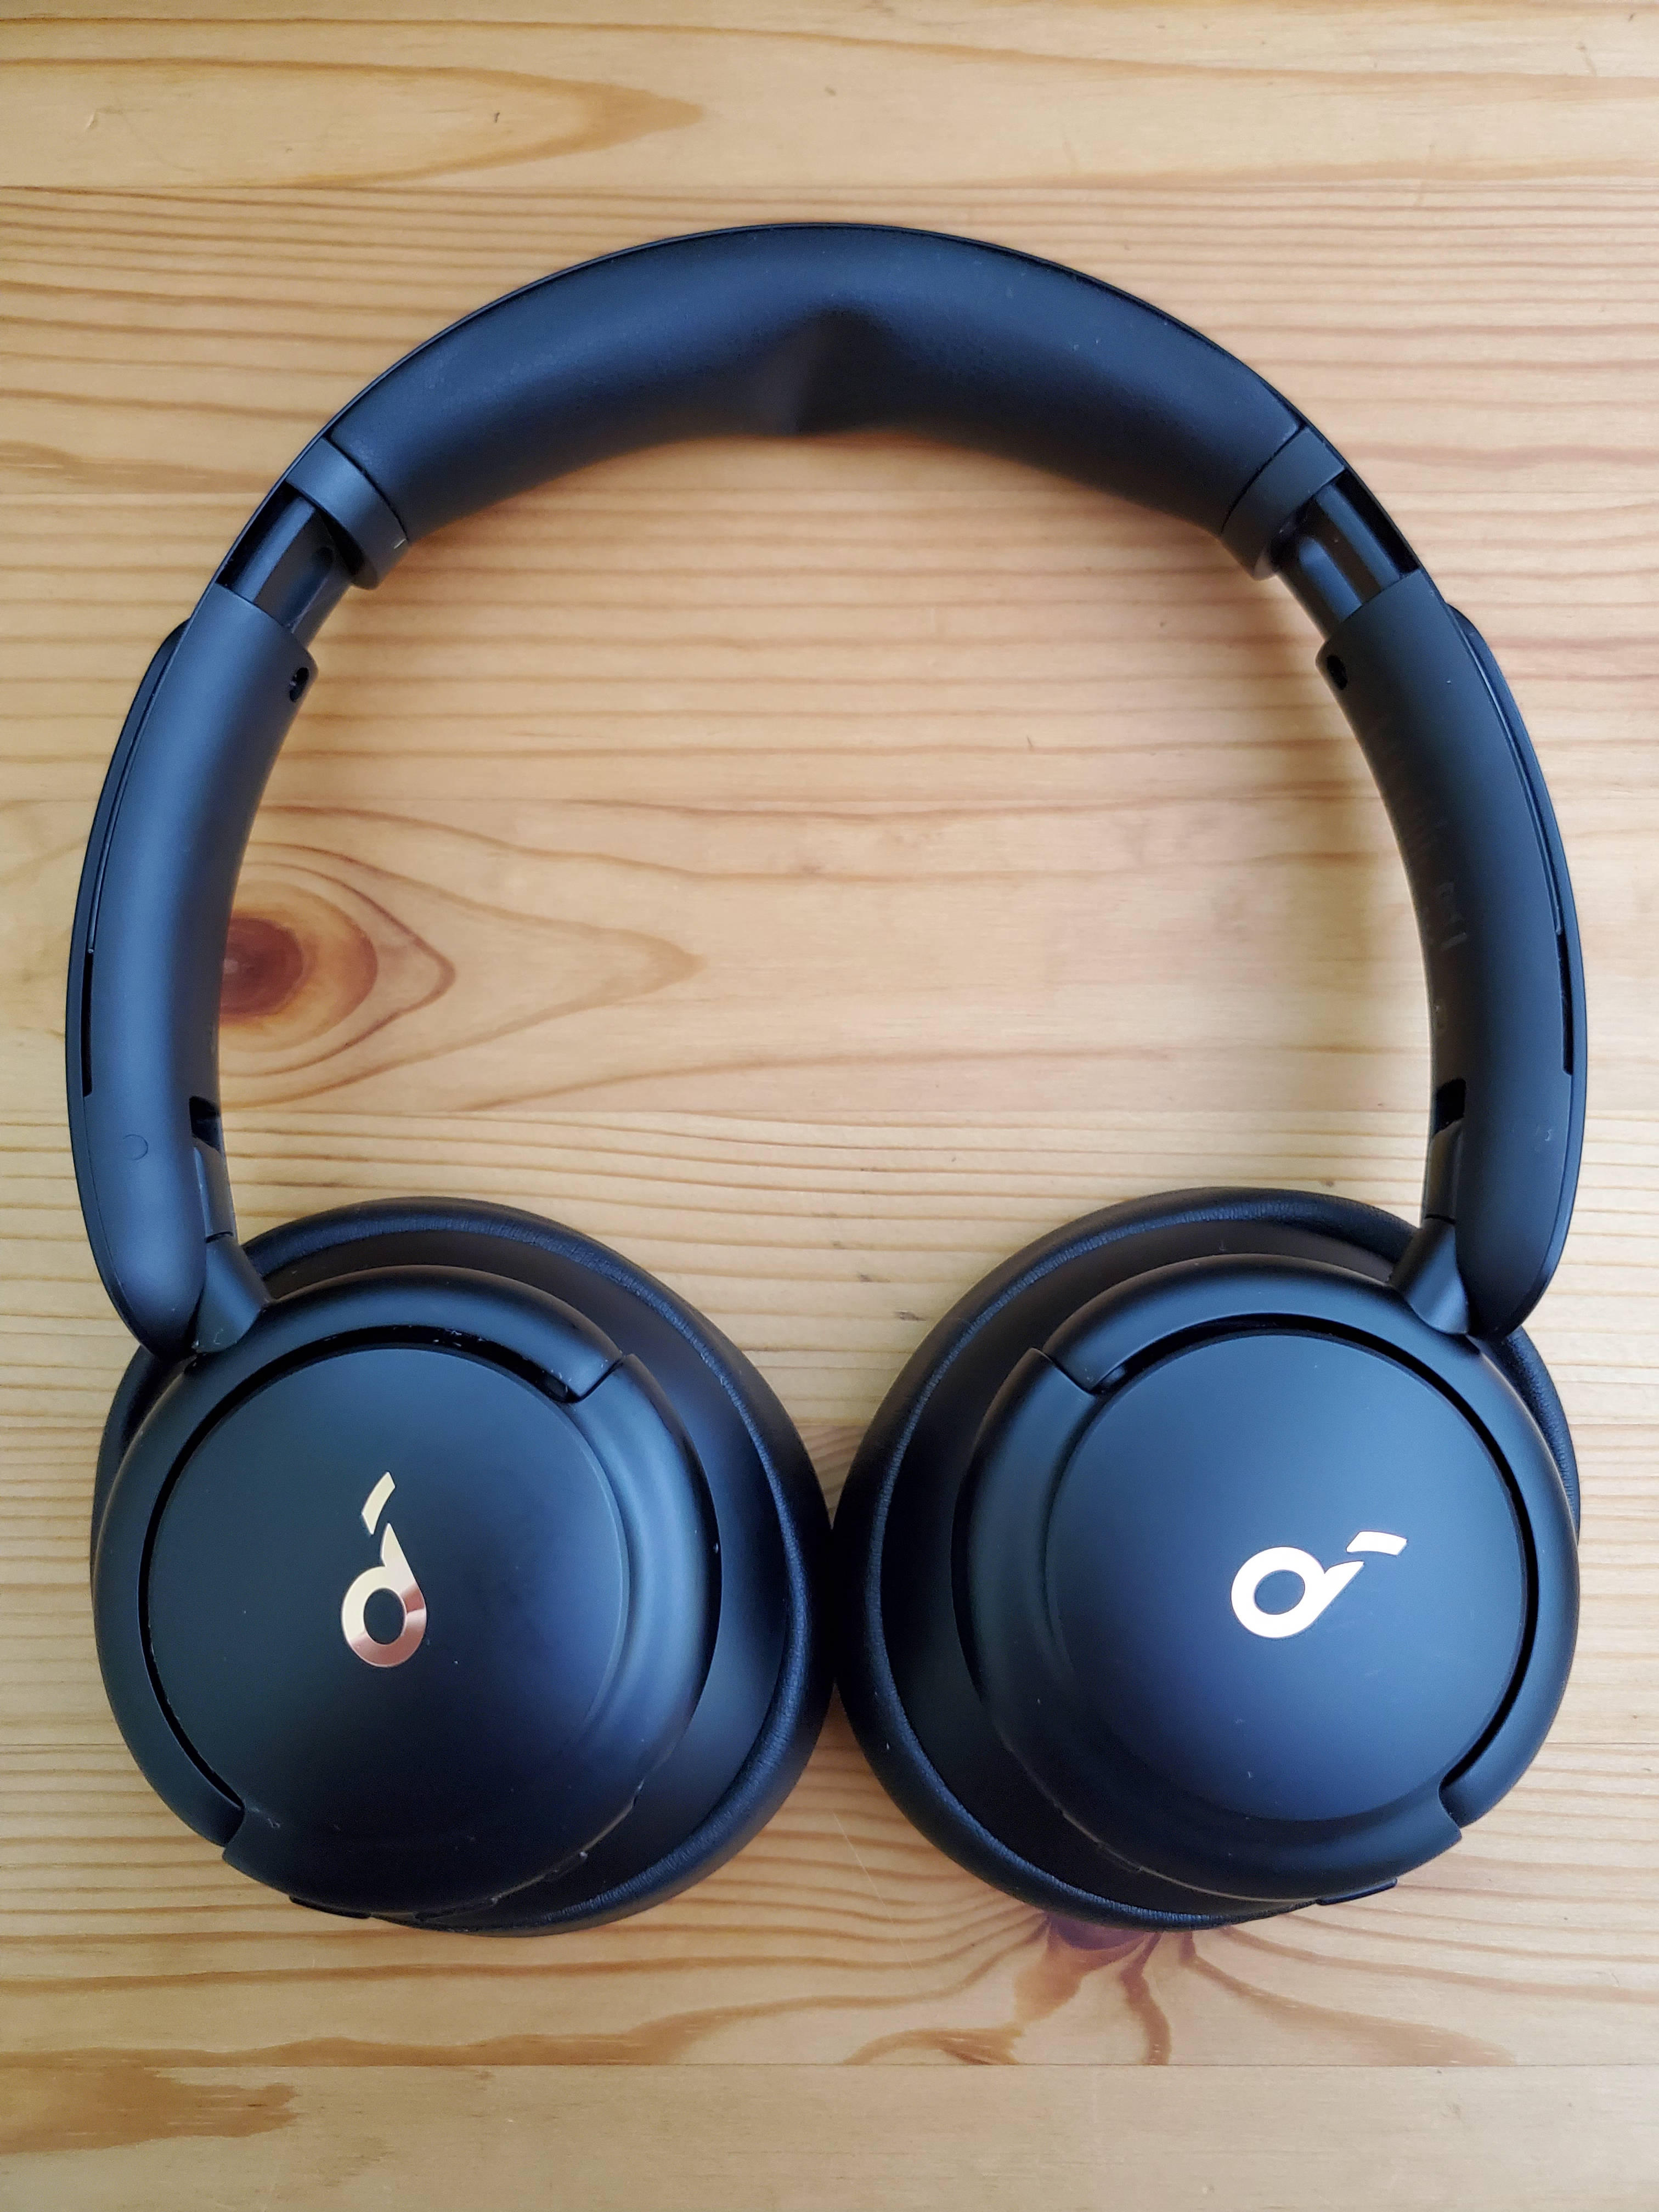 Anker Soundcore Life Q30 Headphones Review - Are These the Best